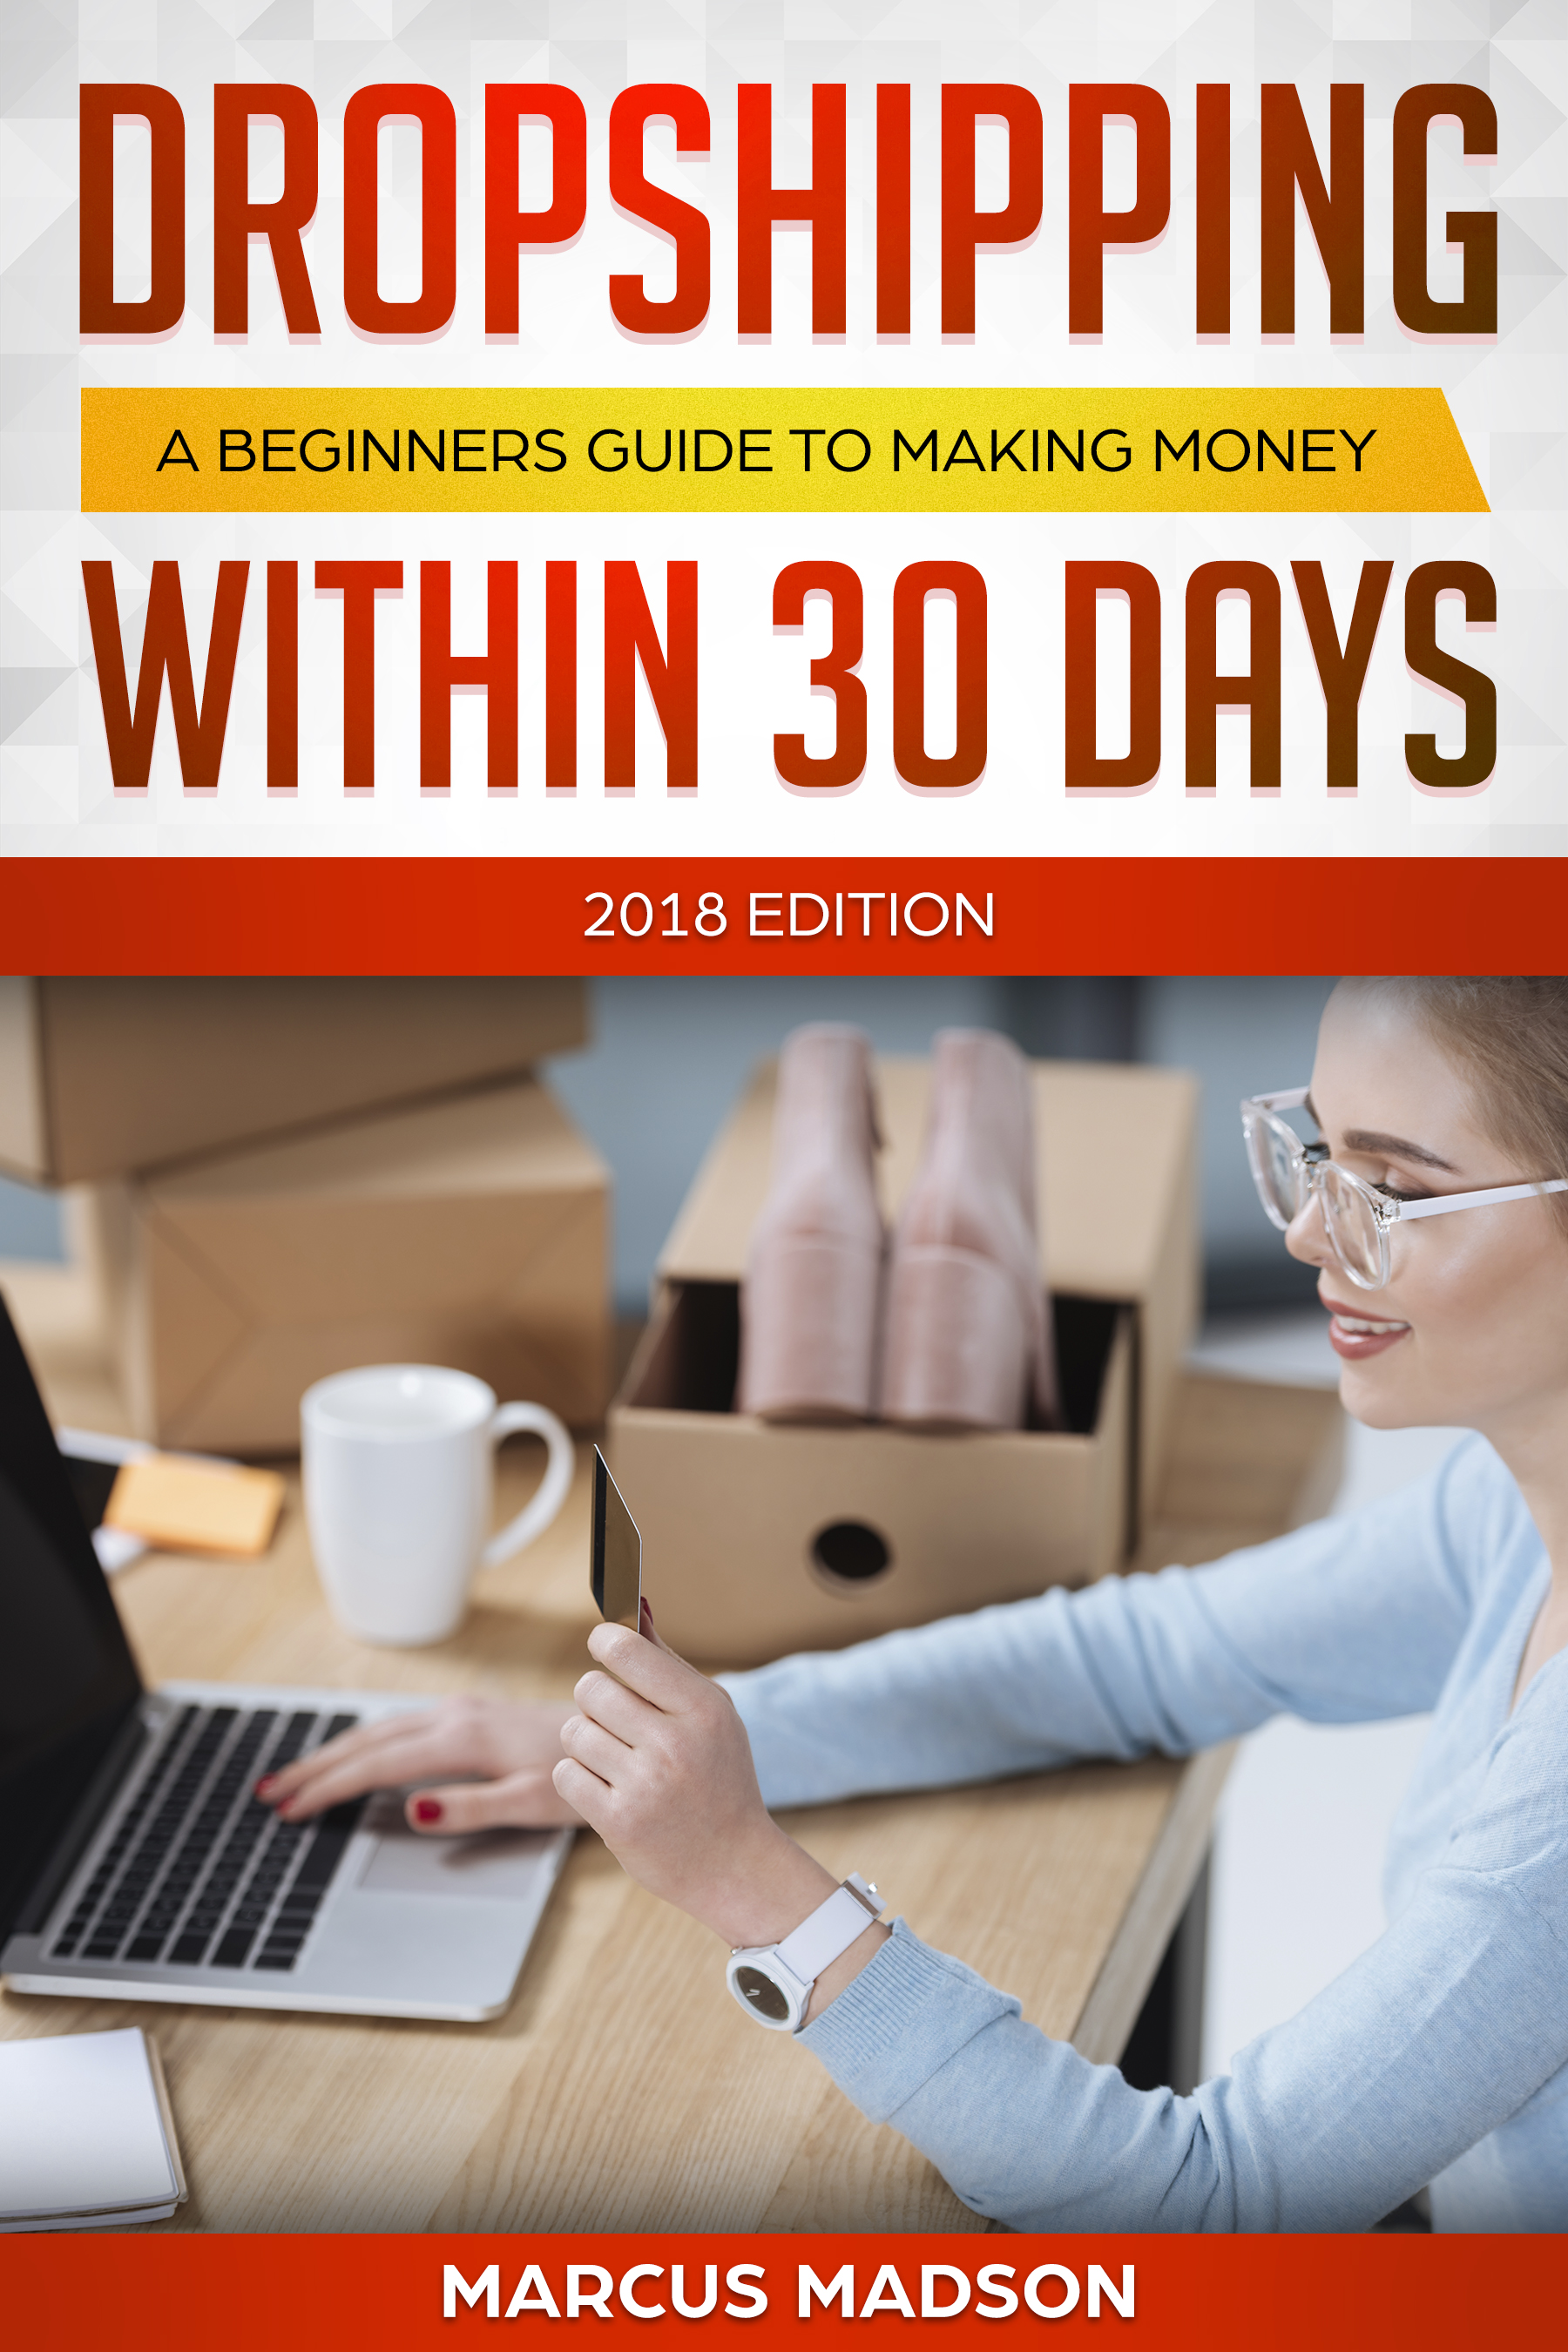 FREE: Dropshipping: A Beginners Guide to Making Money Within 30 Days (2018 Edition) by Marcus Madson